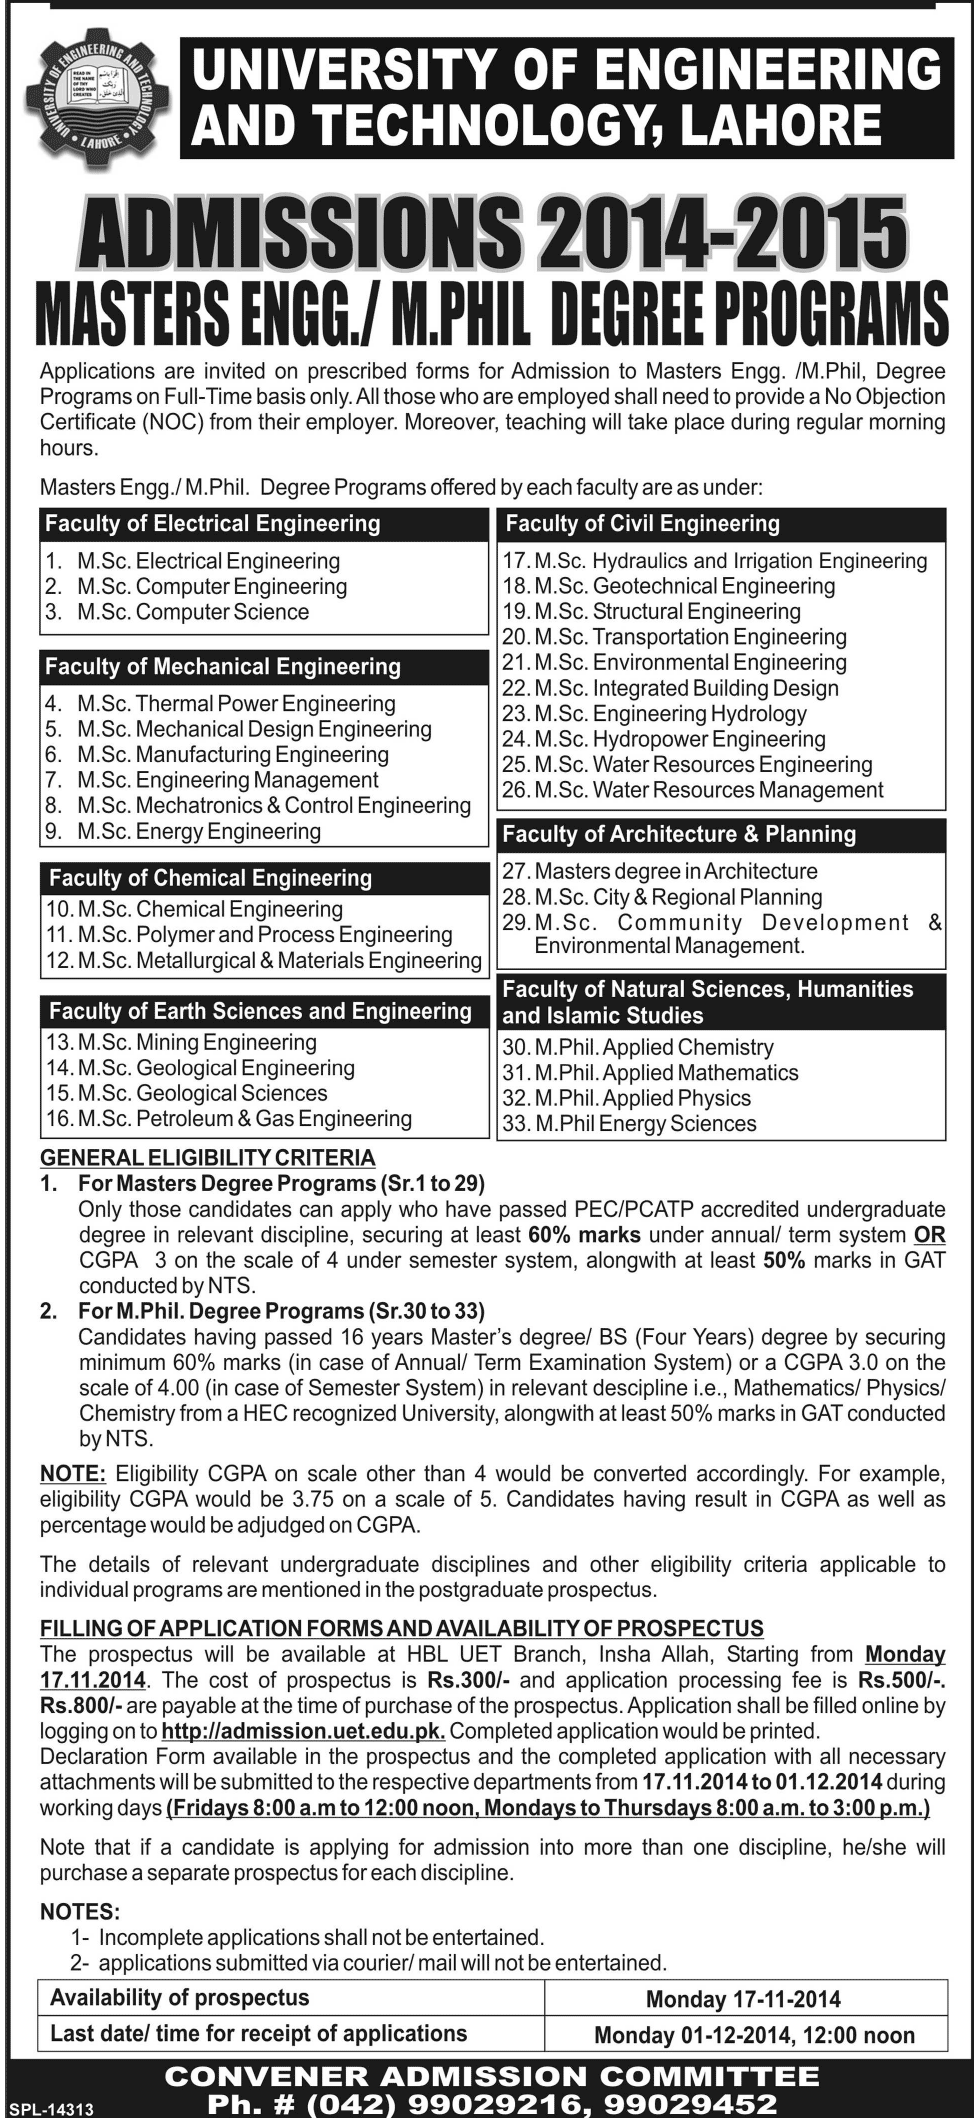 Uet Lahore Masters, M.phil Engineering Admissions 2014-2015 Form, Date